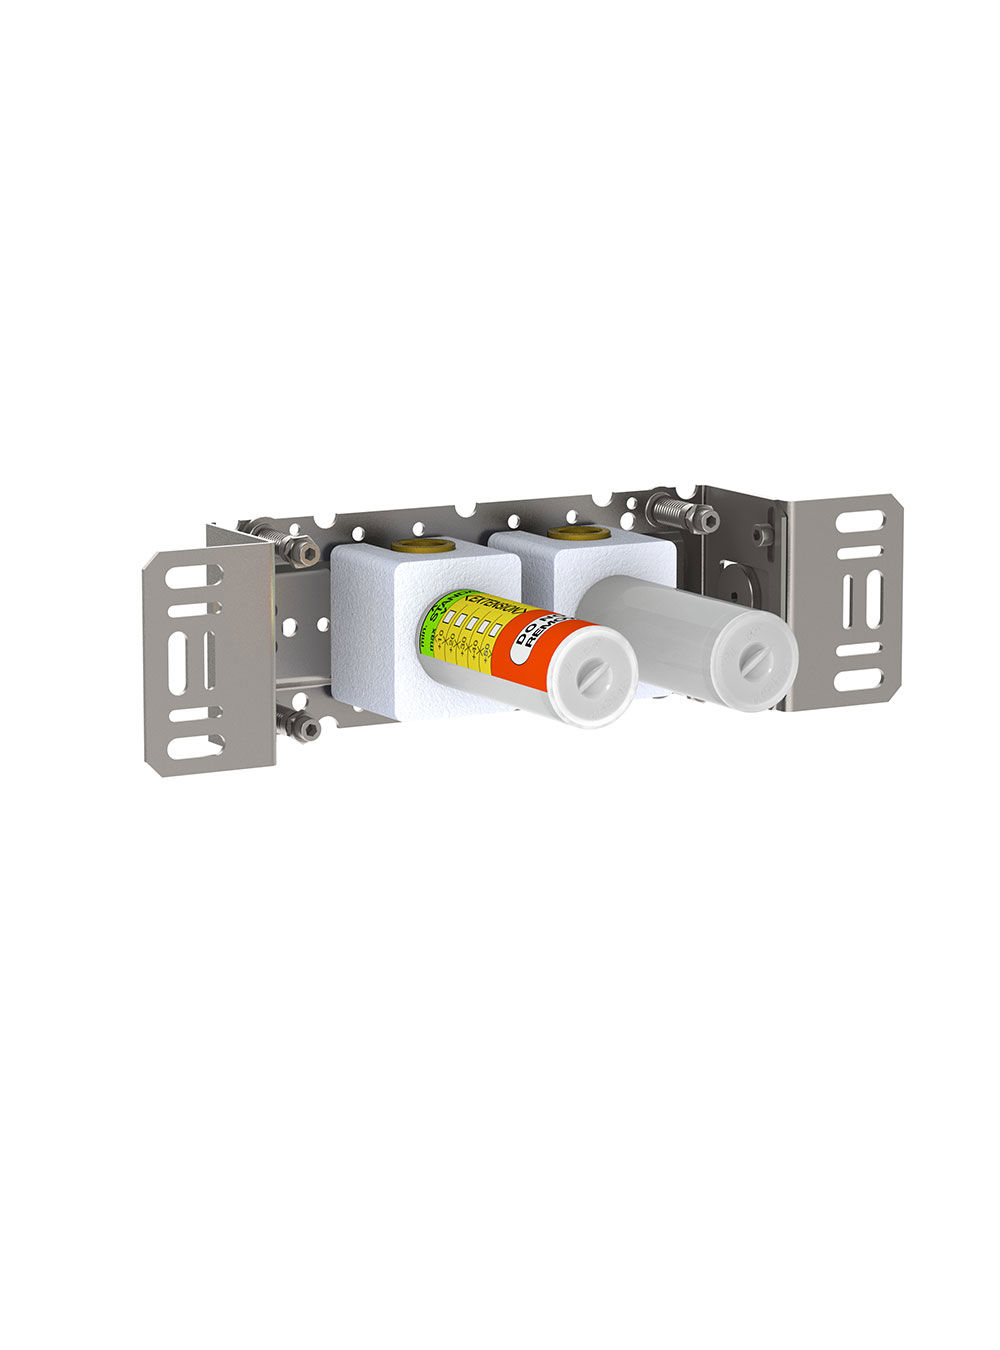 S40V: Build-in double stop valve, ½". ½" connection to copper, steel, iron or pex pipe work.